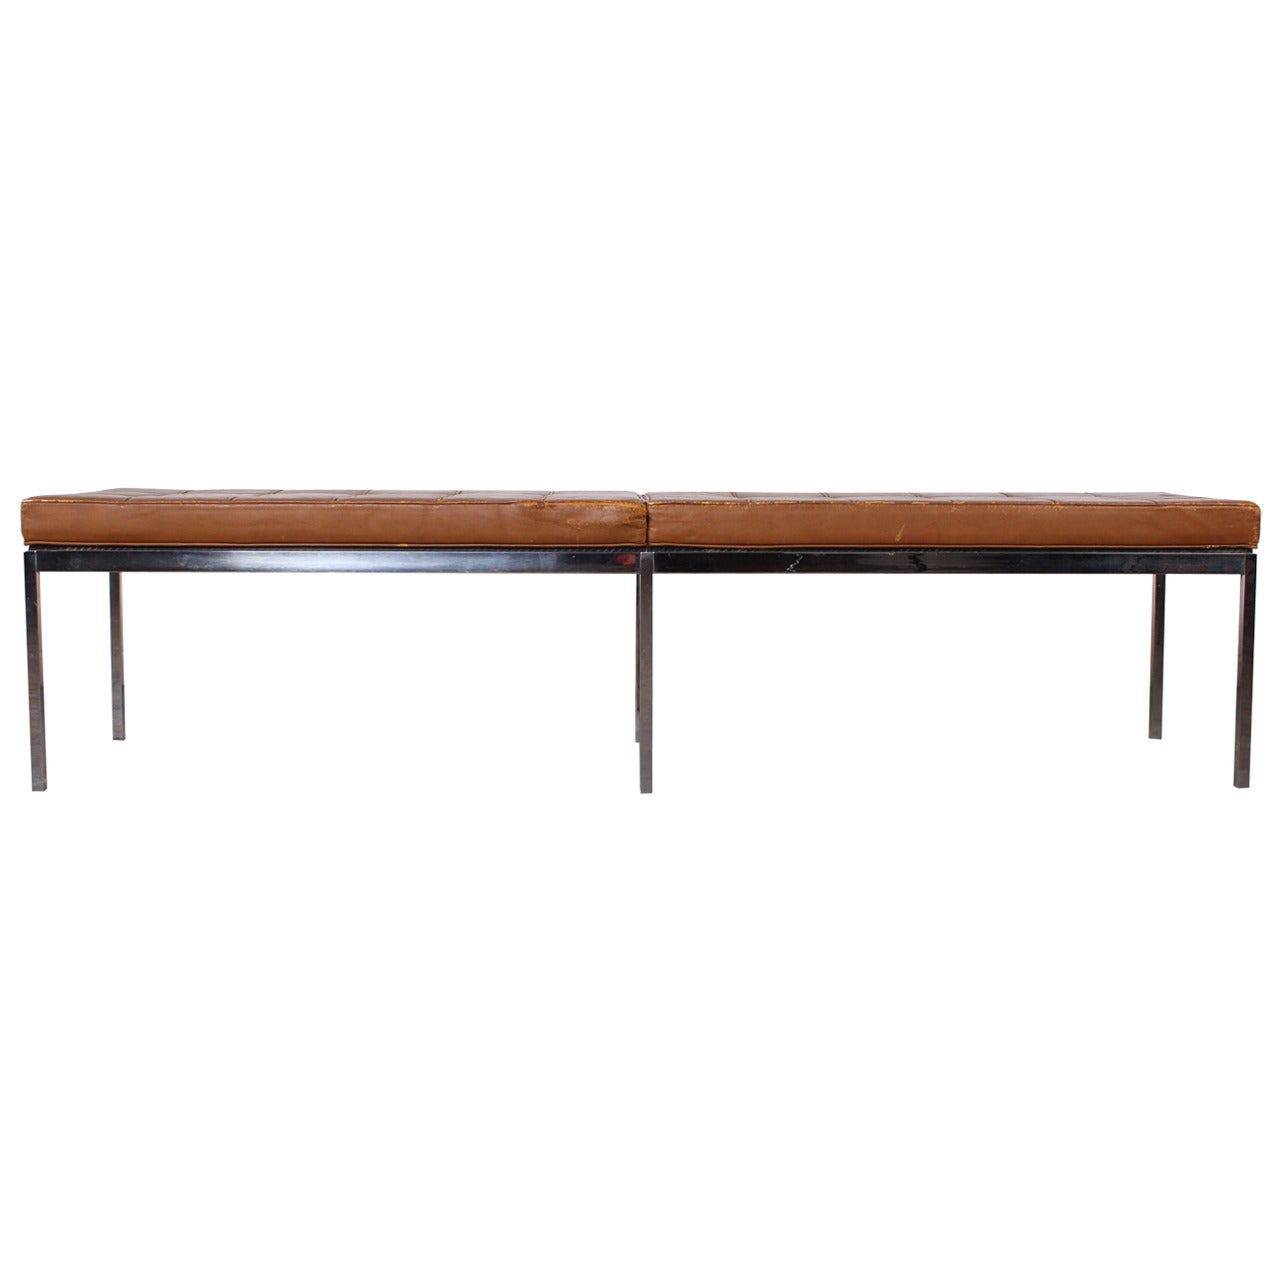 Bench by Florence Knoll